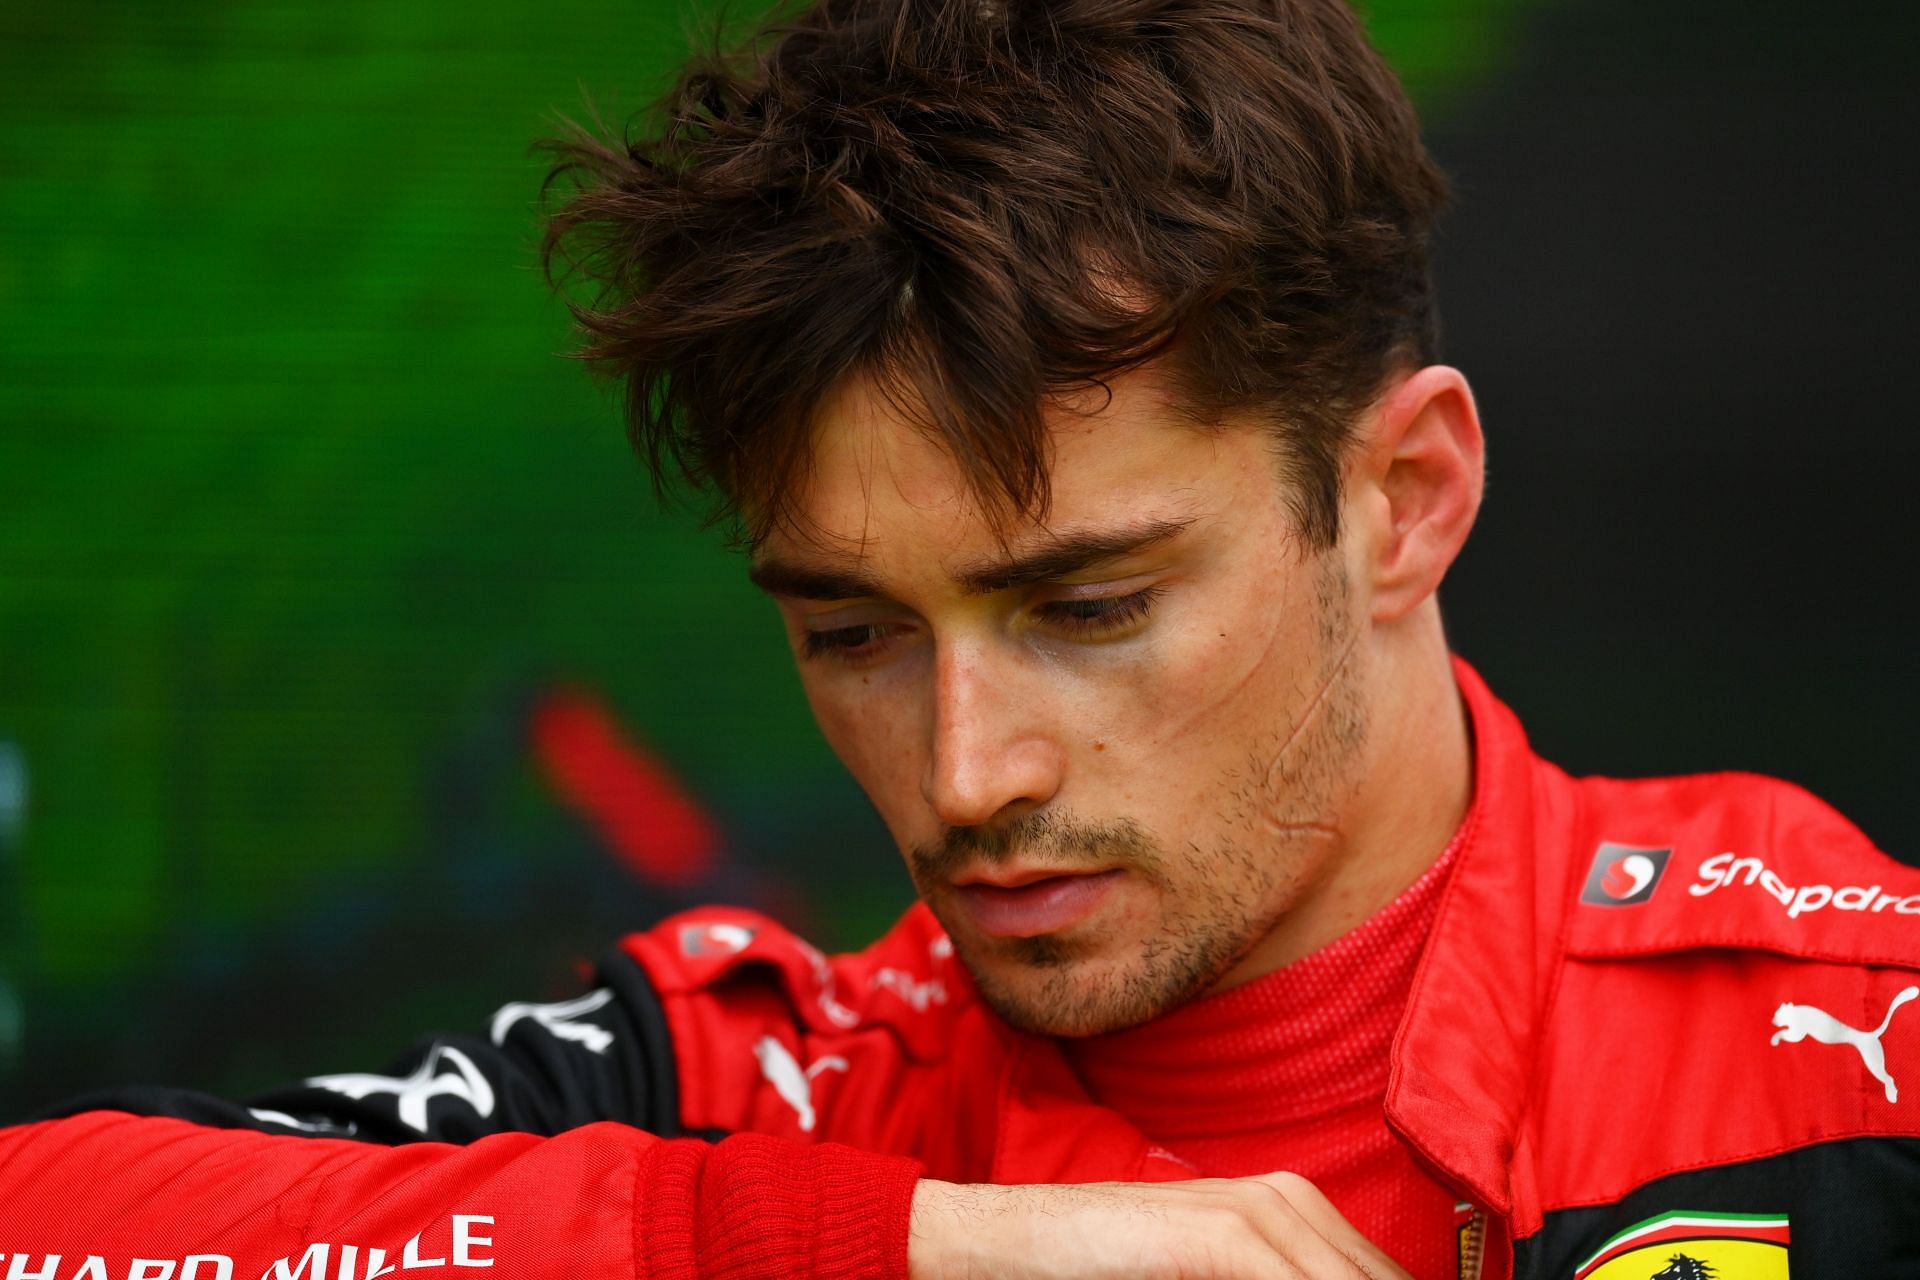 Charles Leclerc is facing challenges beyond his control, just like his predecessors did